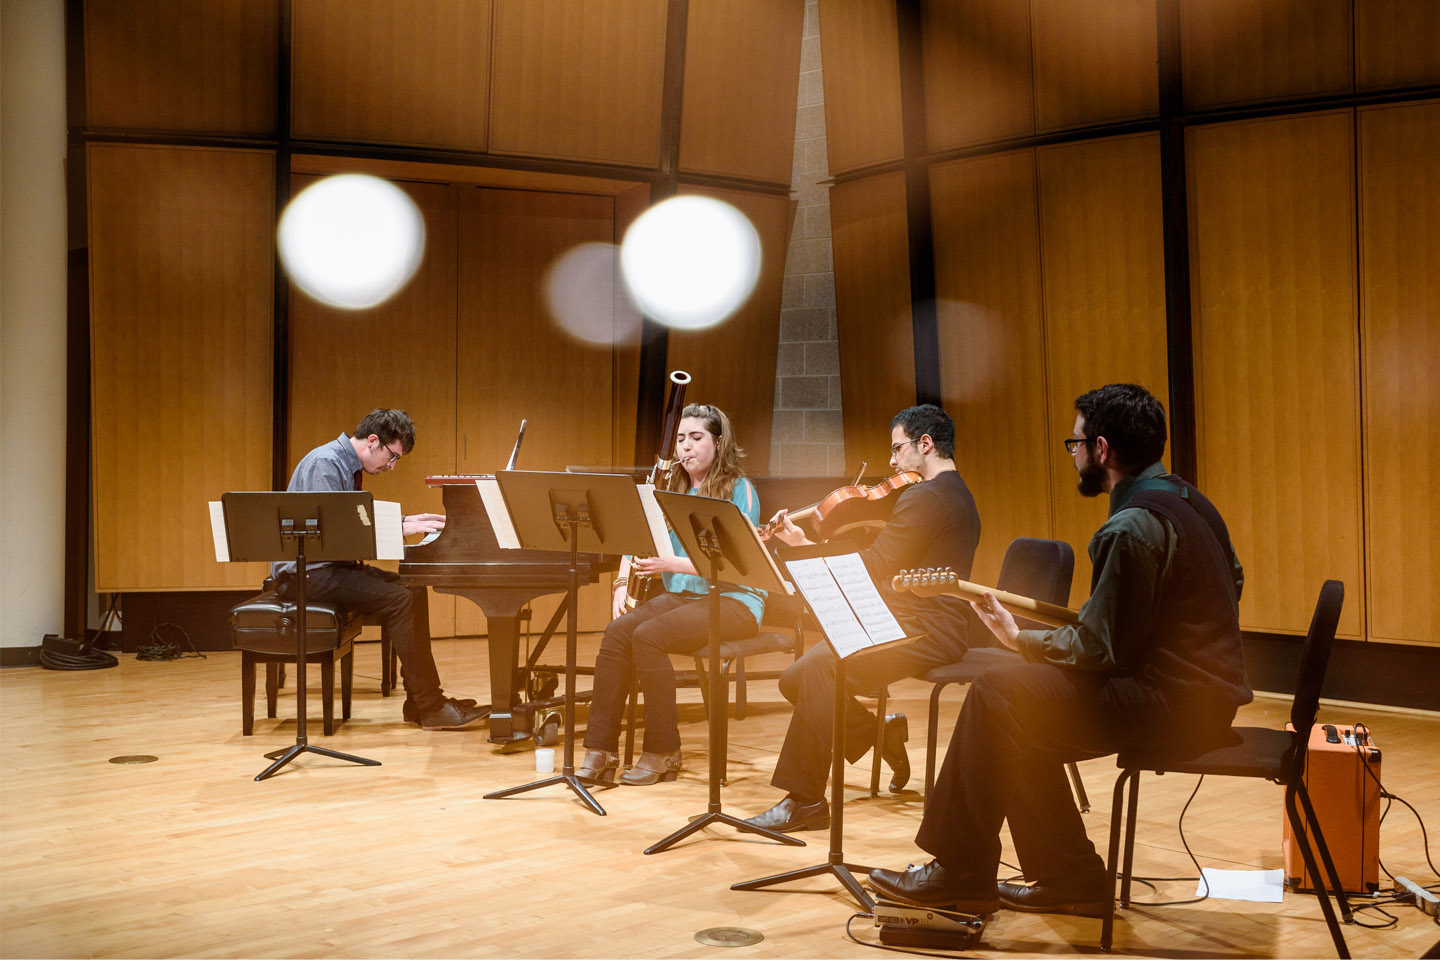 Chamber music group performing with piano, bassoon, violin, and guitar